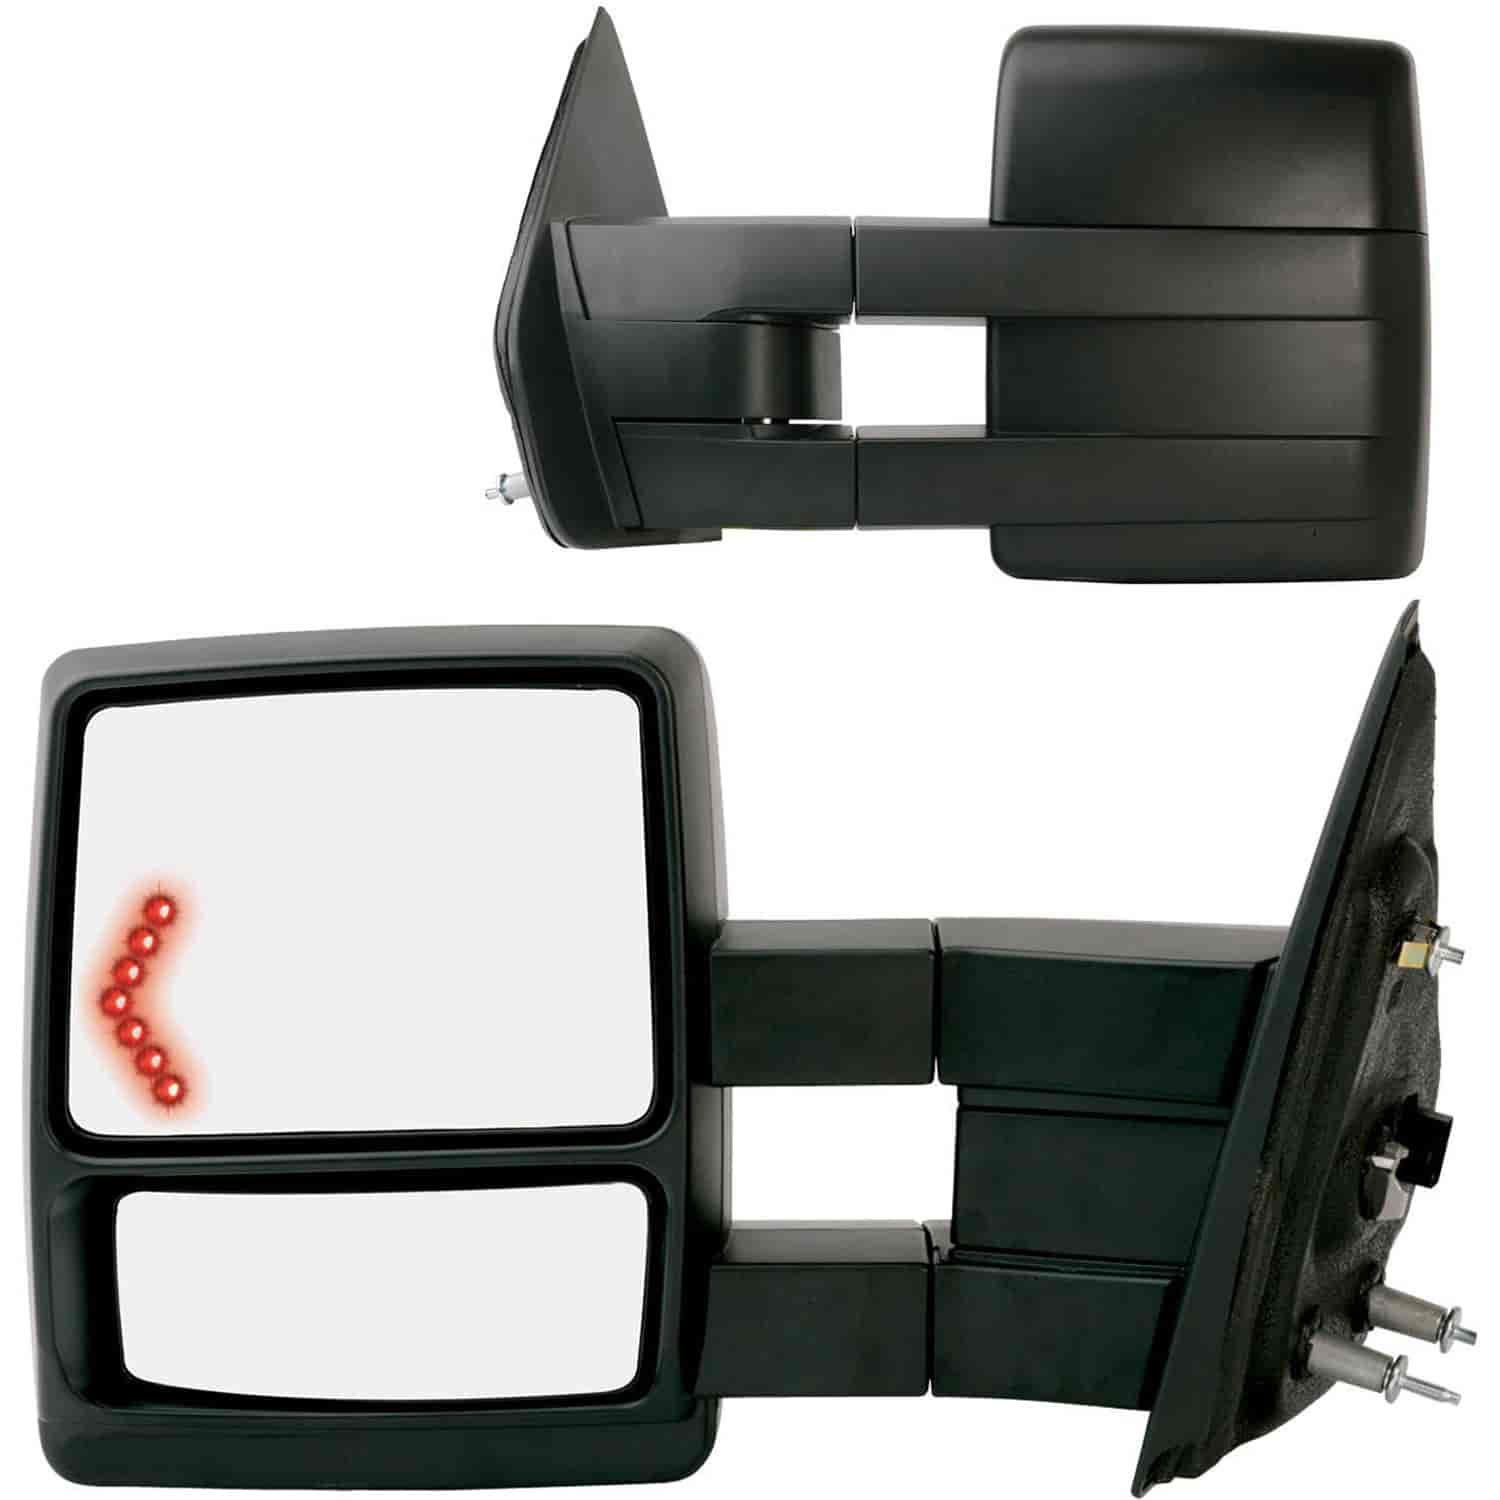 OEM Style Replacement mirror set for 09-12 Ford F150 extendable towing mirror w/LED Arrow turn signa